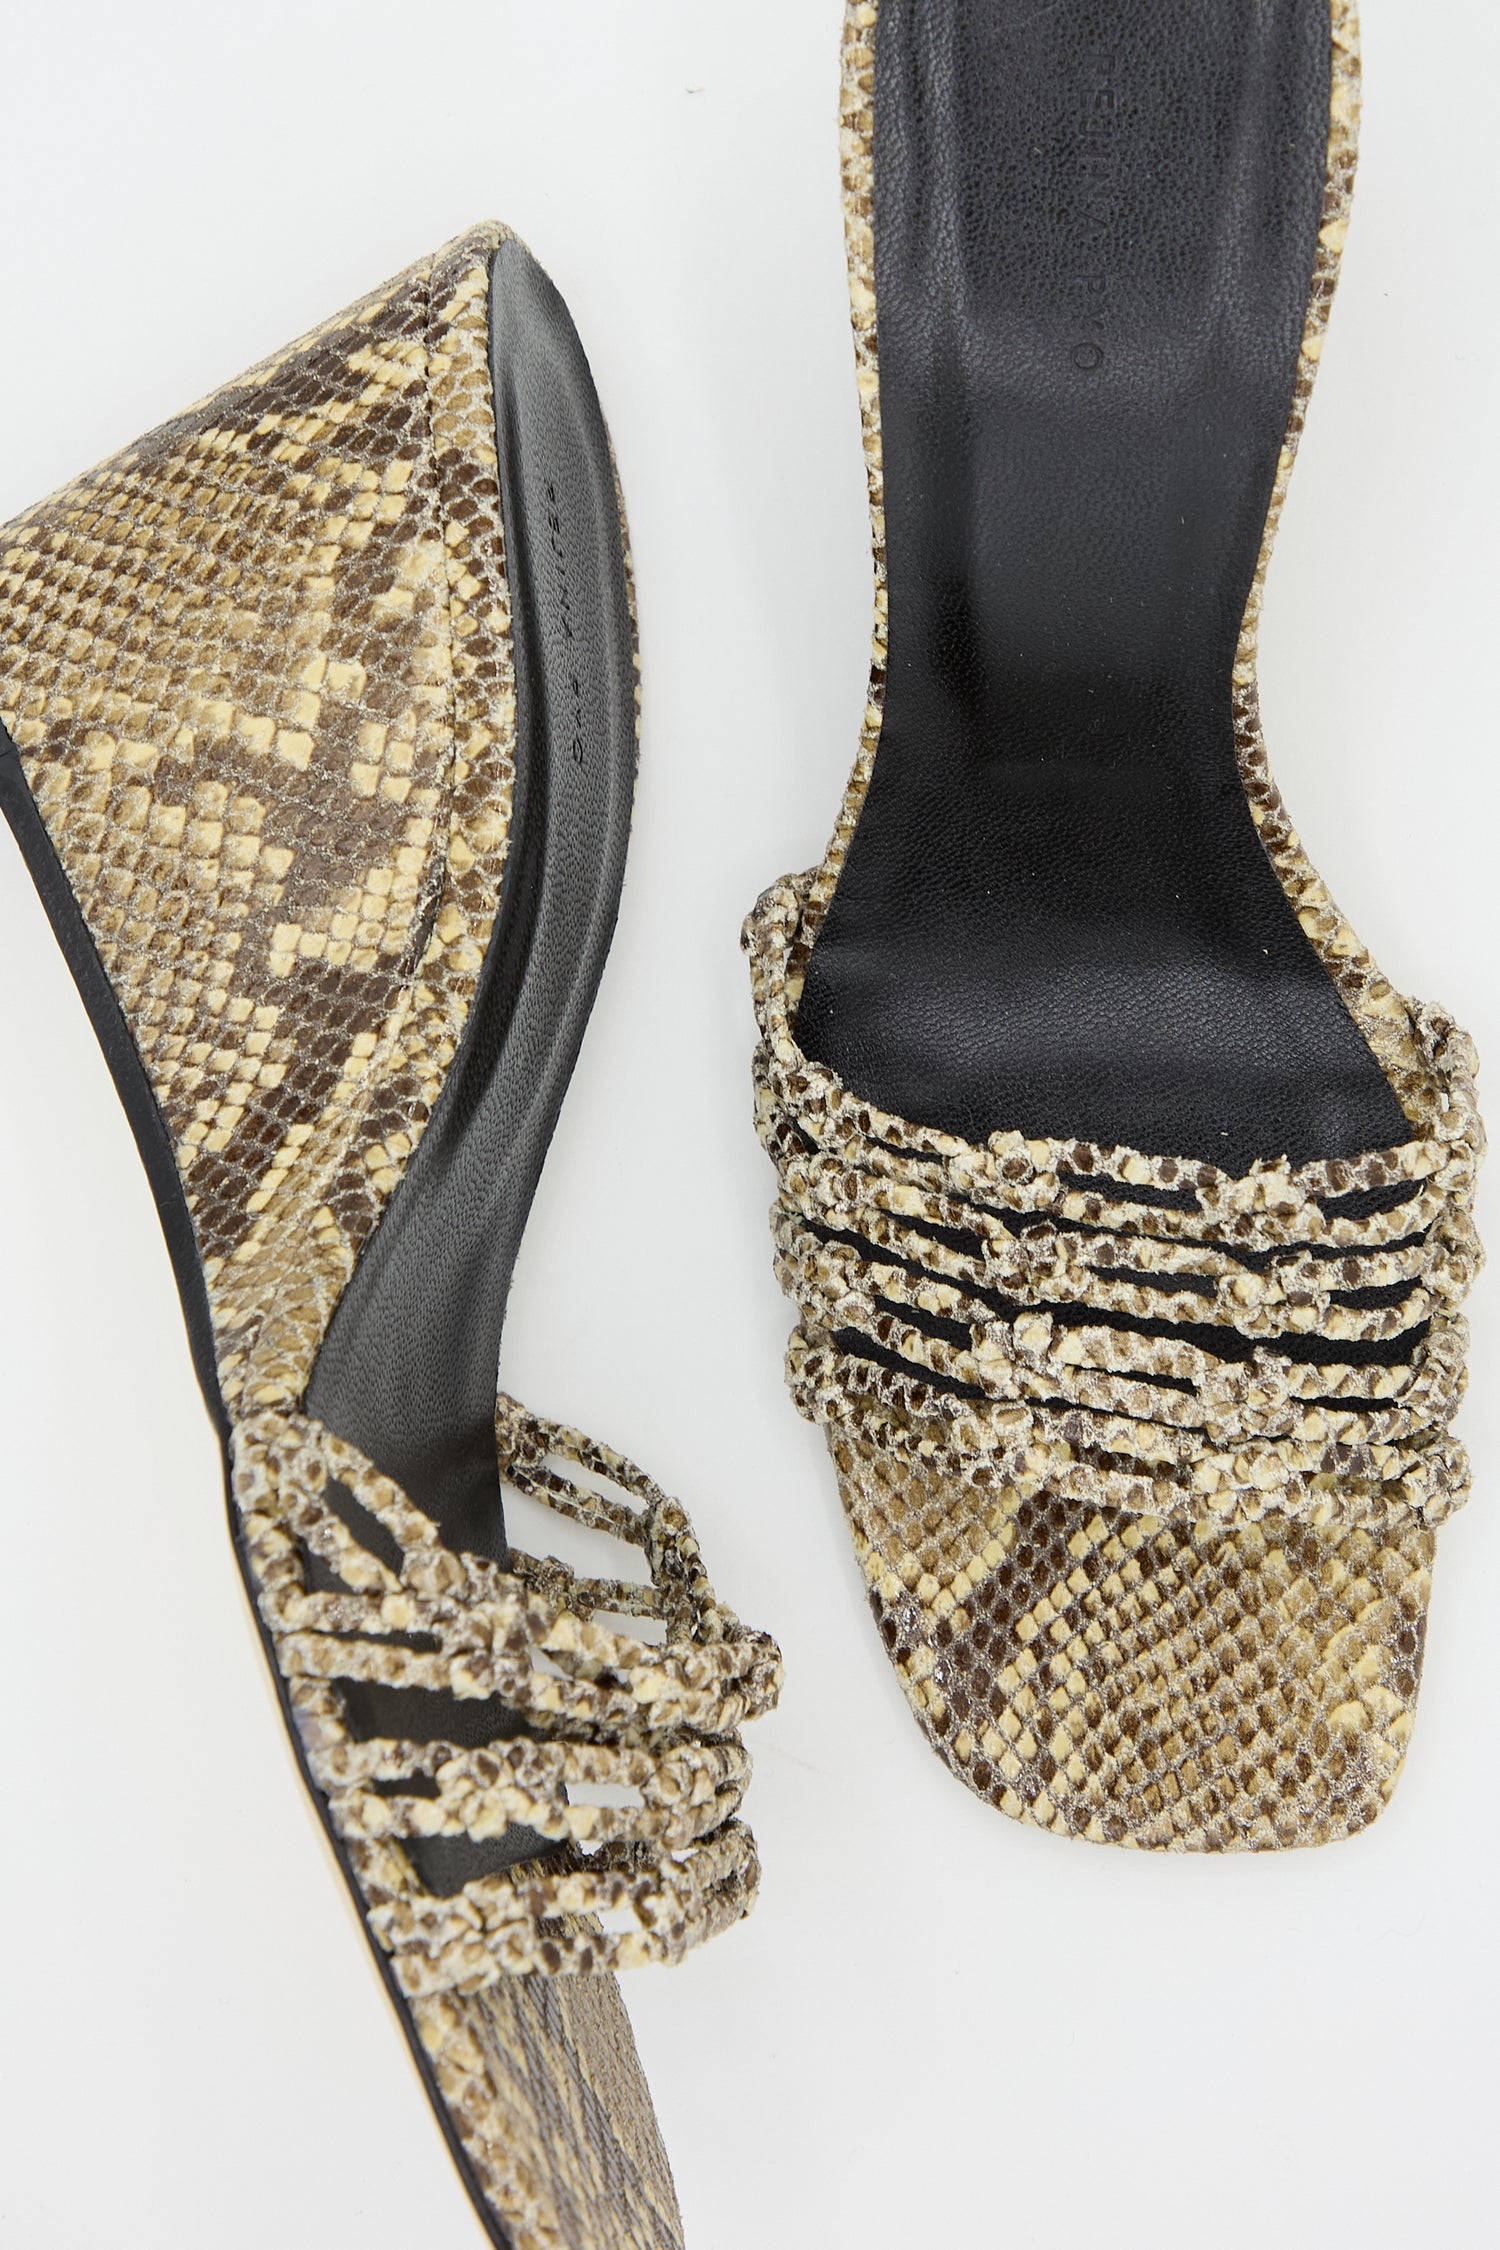 Pair of high-heeled shoes with Rejina Pyo Leather Print Kyle Wedges in Snake Butter and ruffled details.